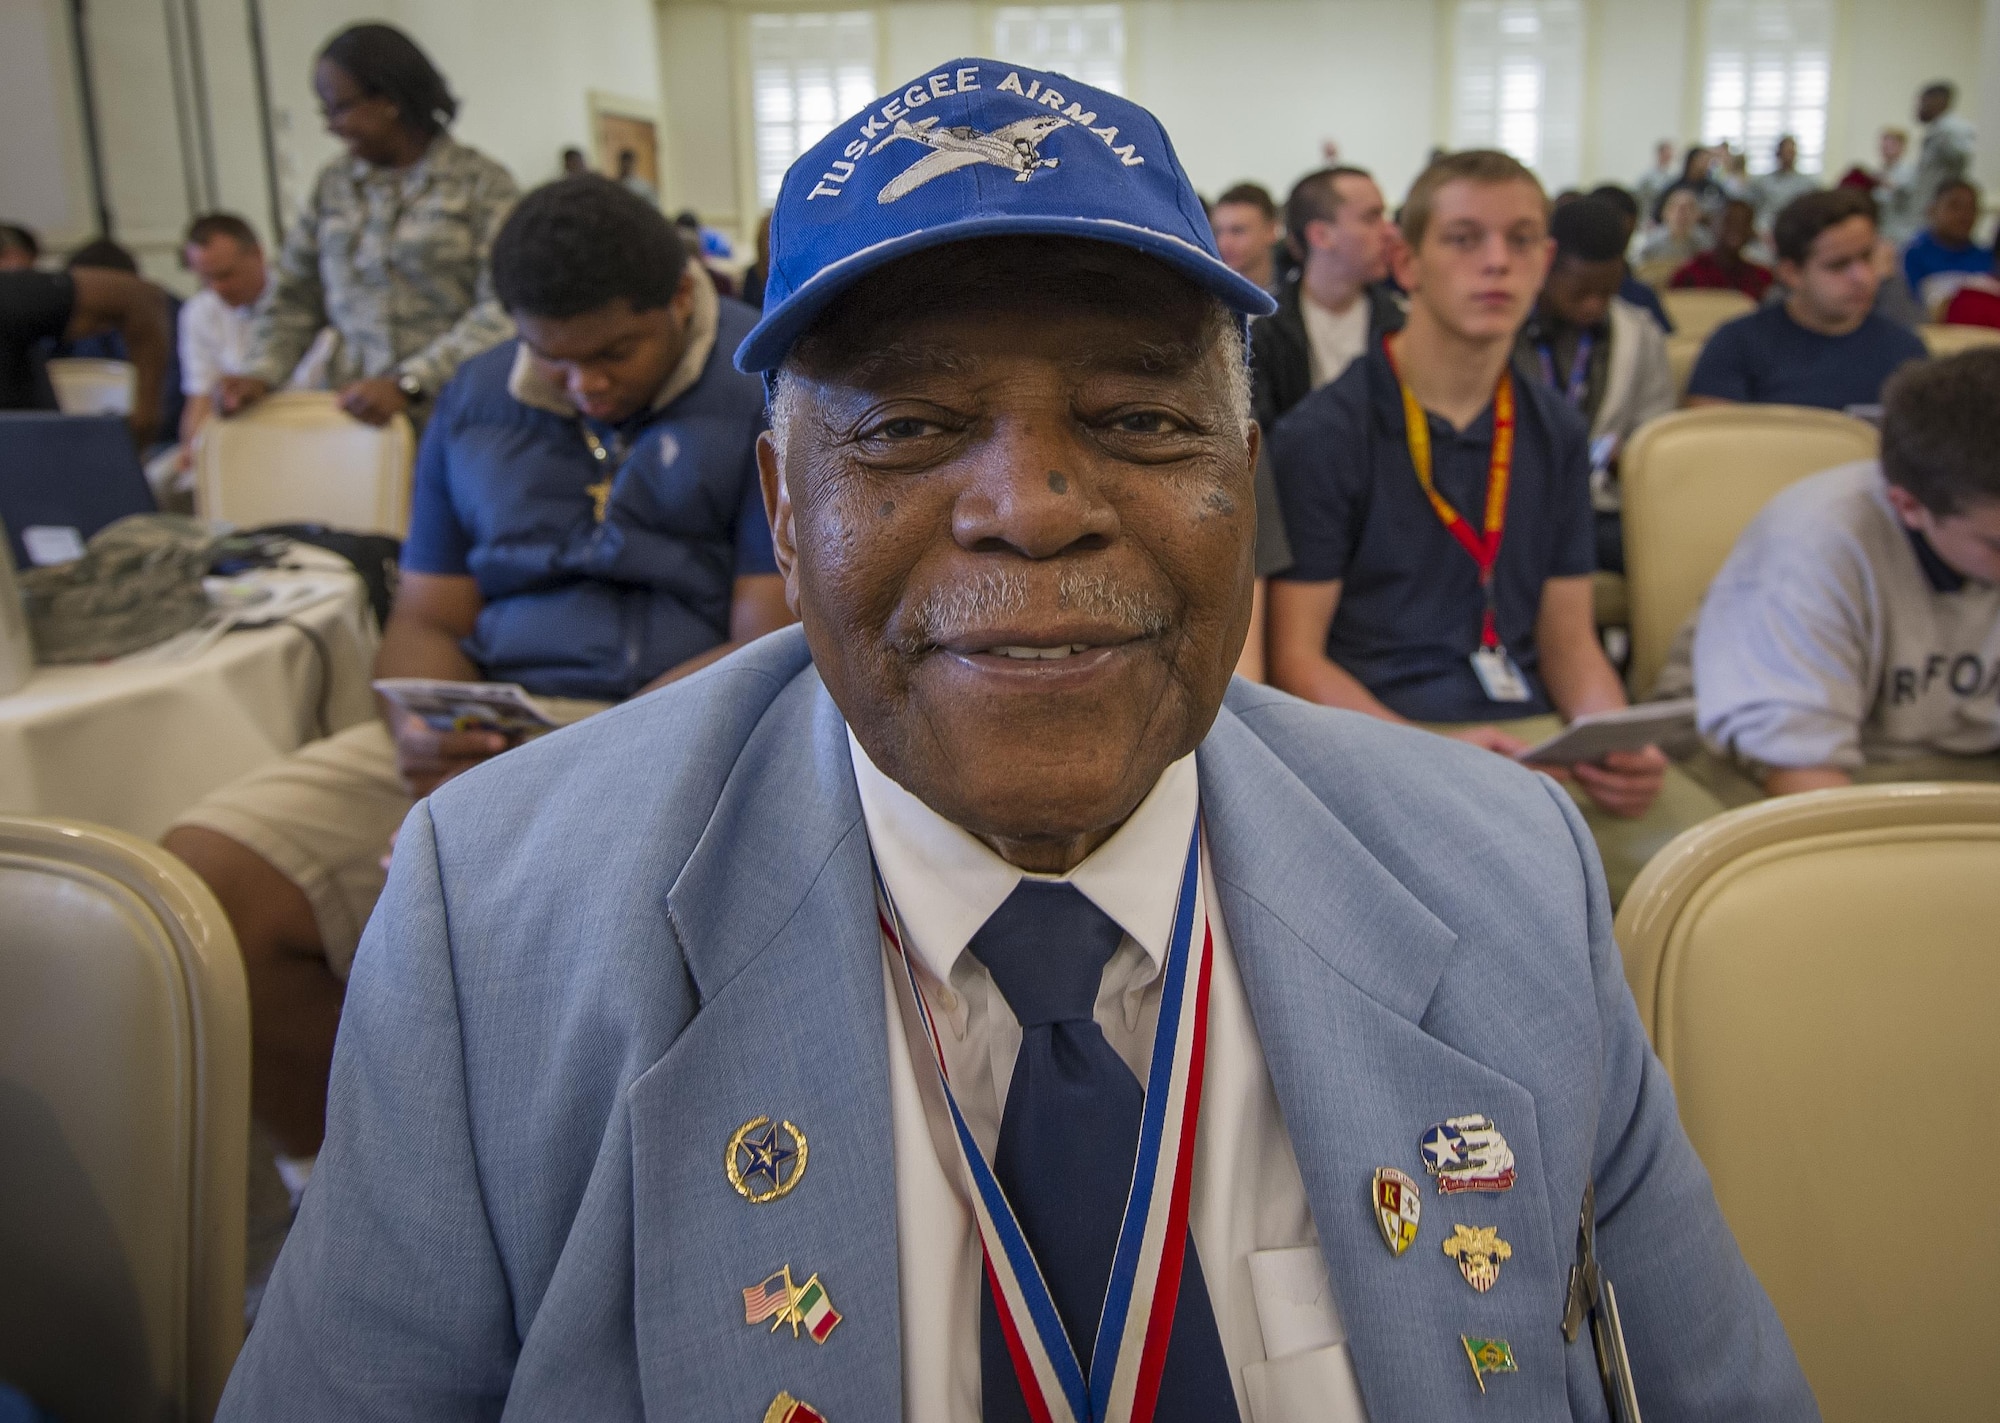 Former 2nd Lt. and original Tuskegee Airman, Dr. Eugene Richardson, Jr. awaits the guest speaker Feb. 23, 2017, the morning of the Tuskegee Airmen Career Day at Joint Base Charleston, S.C. More than 150 students from middle and high school boys from 17 Lowcountry school visited Joint Base Charleston Feb. 23, 2017, to learn about jobs in aviation as part of the second annual Tuskegee Airmen Career Day, hosted by the 315th Airlift Wing. The boys were able to learn about military and civilian careers in aviation by more than 15 different career fields. (U.S. Air Force photo by Senior Airman Tom Brading)